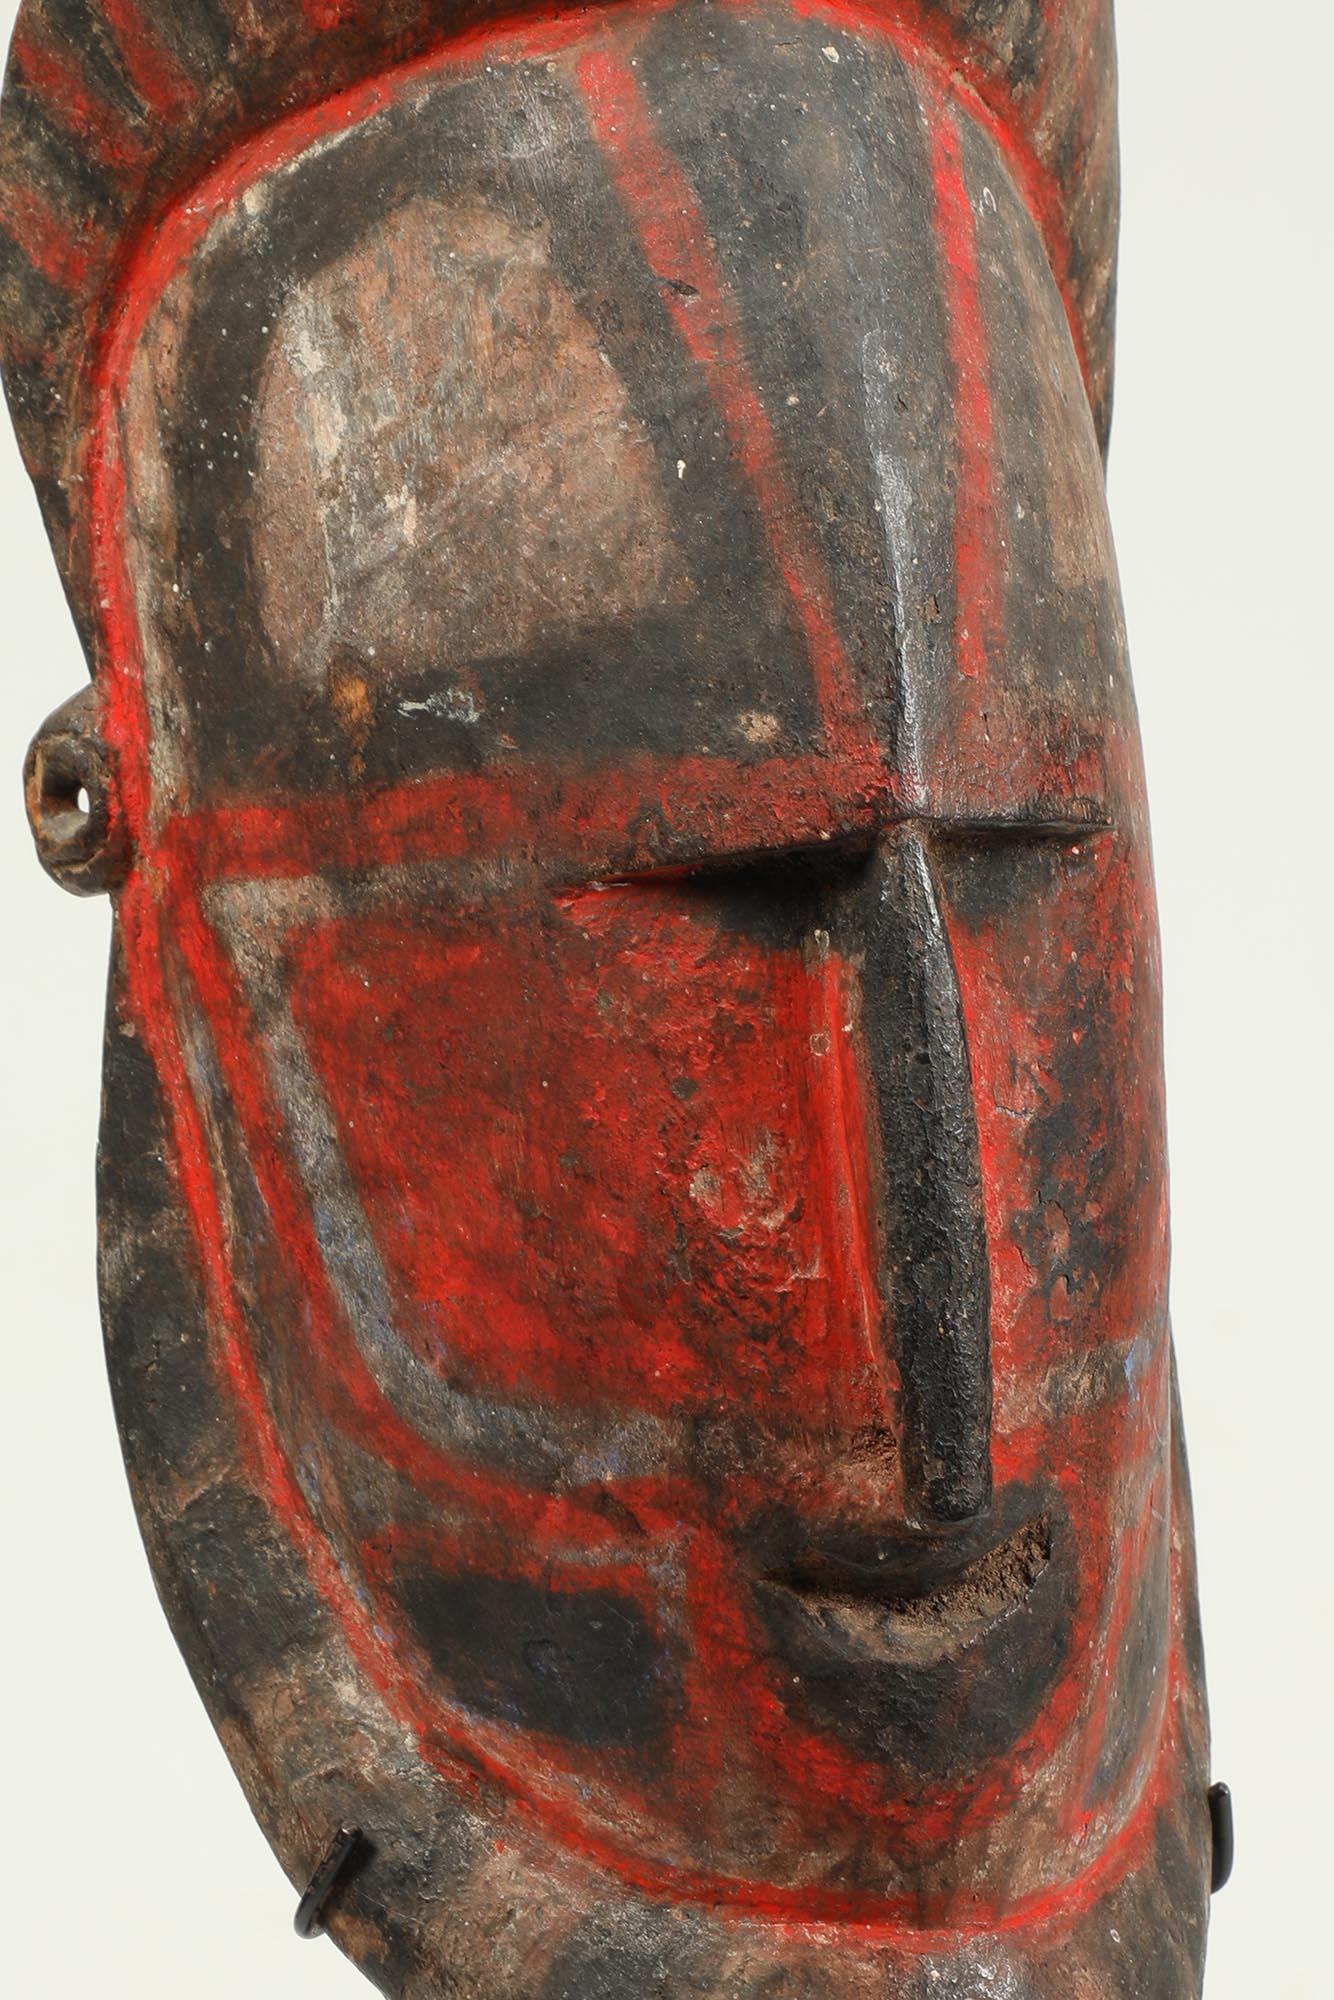 Early Papua New Guinea Sepik hard wood yam mask with areas of red, black and white pigments.
Mask is 10 inches high, on custom metal base total height 12 1/2 inches.

